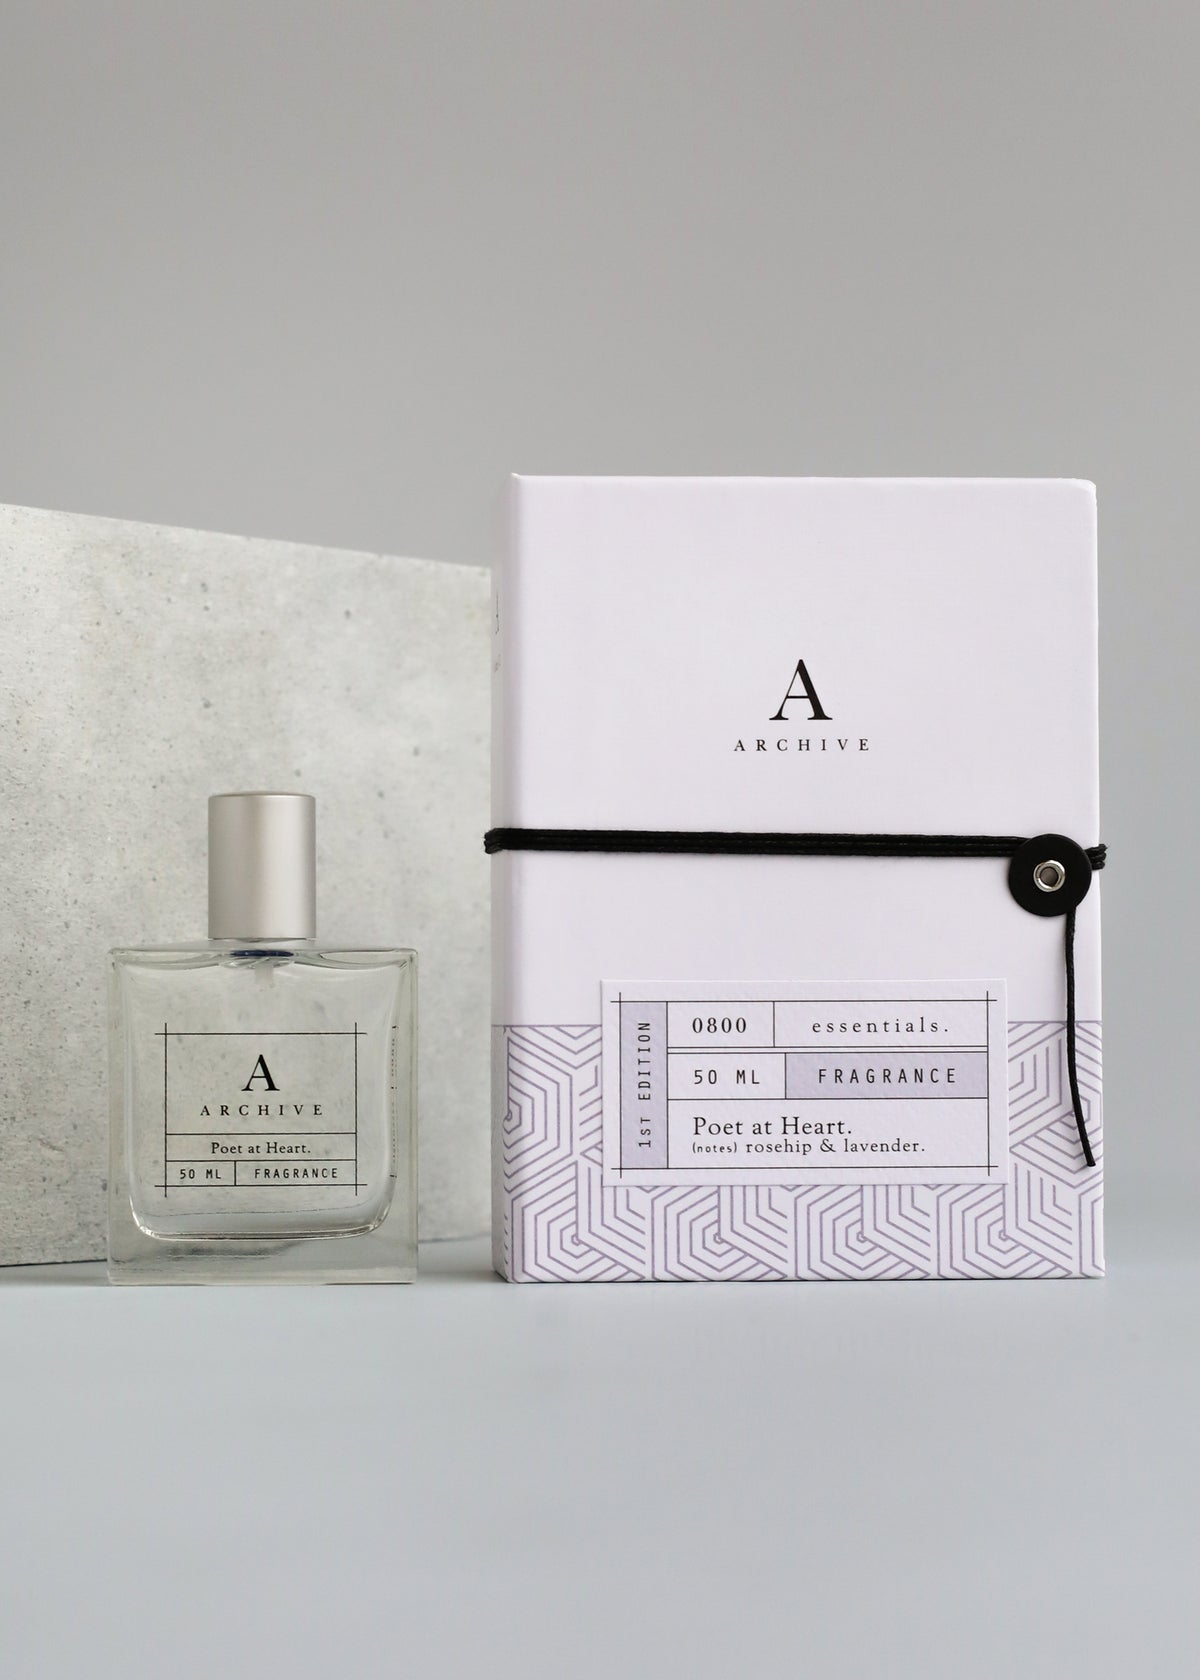 A square Poet at Heart Fragrance bottle with a label next to a white box adorned with geometric patterns and placed on a gray tabletop. The box has an "a" logo and text describing the calming scent by Margot Elena.